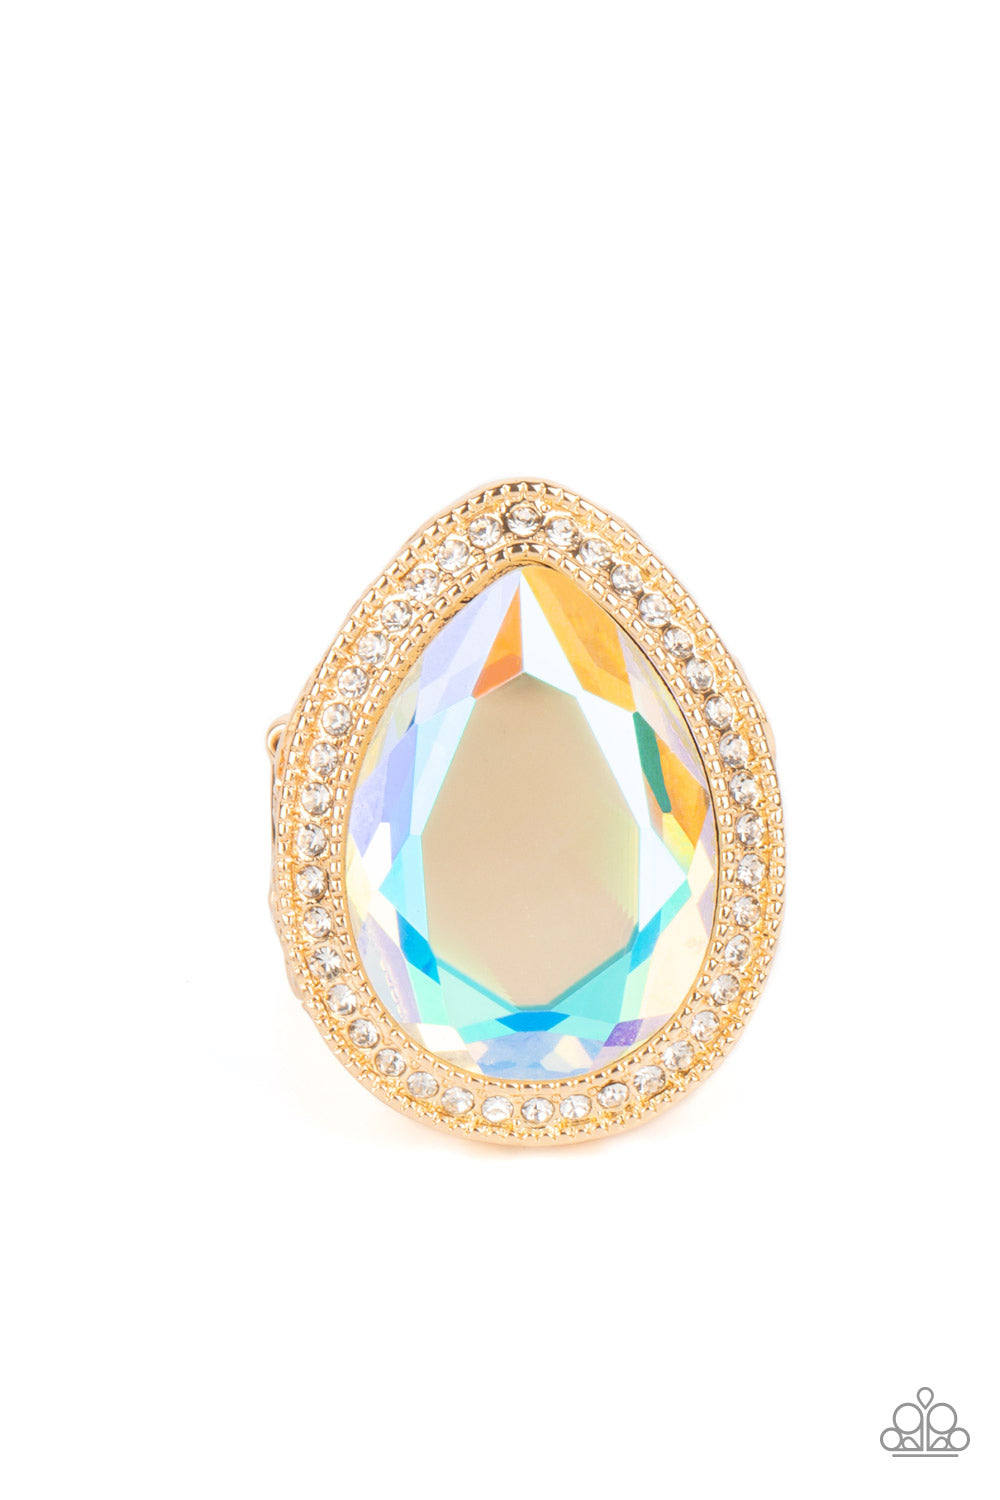 Illuminated Icon Gold Ring - Paparazzi Accessories  An oversized teardrop gem with an iridescent finish is nestled inside a gold teardrop frame encrusted in dainty white rhinestones. Airy teardrop cutouts decorate each side of the oversized frame### some with subtle texture and others with a high sheen finish. Features a stretchy band for a flexible fit. Due to its prismatic palette### color may vary.  Sold as one individual ring.